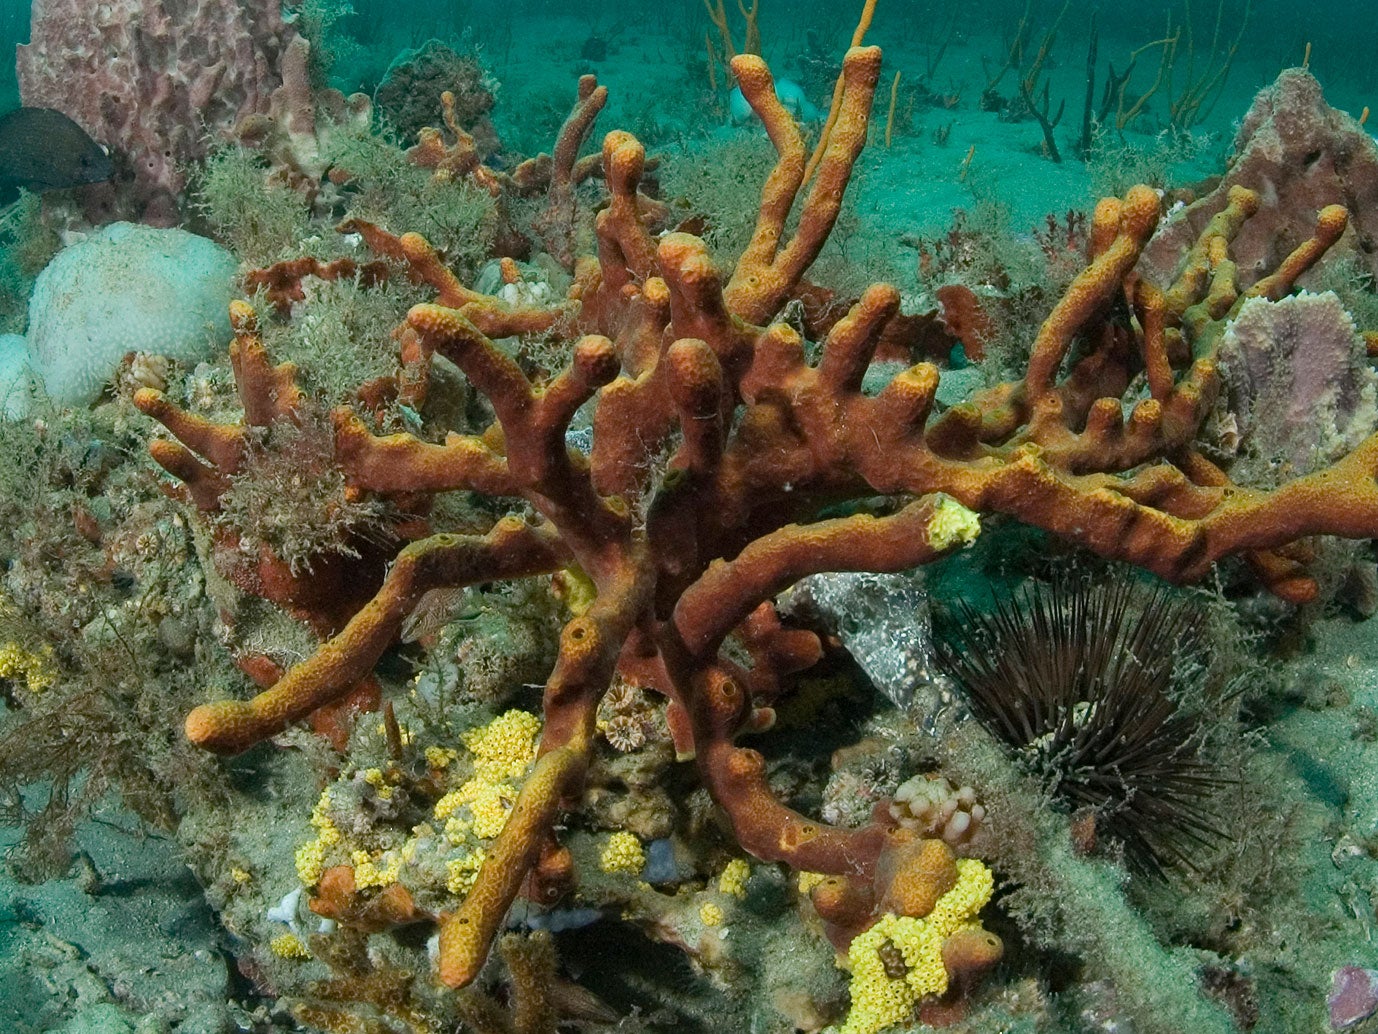 Aplysina fulva, a type of sponge characterized by long rope-like branches. This specimen lives within Gray's Reef National Marine Sanctuary off the coast of Georgia.